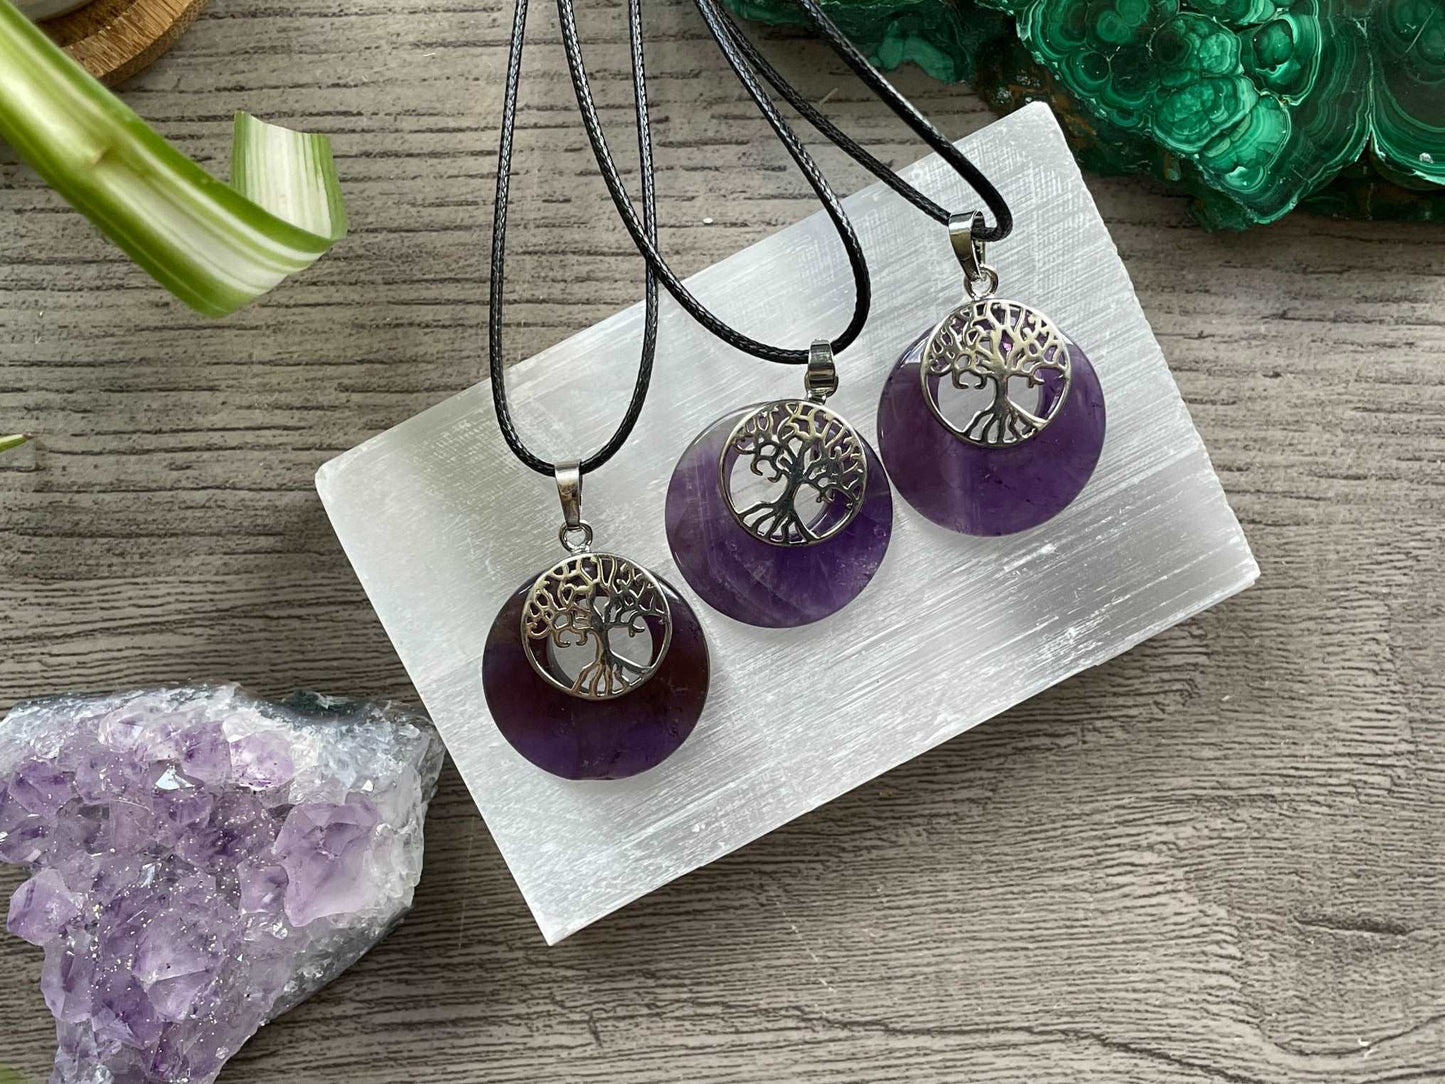 An image of a circular amethyst necklace with a silver coloured tree of life charm over top of the amethyst.